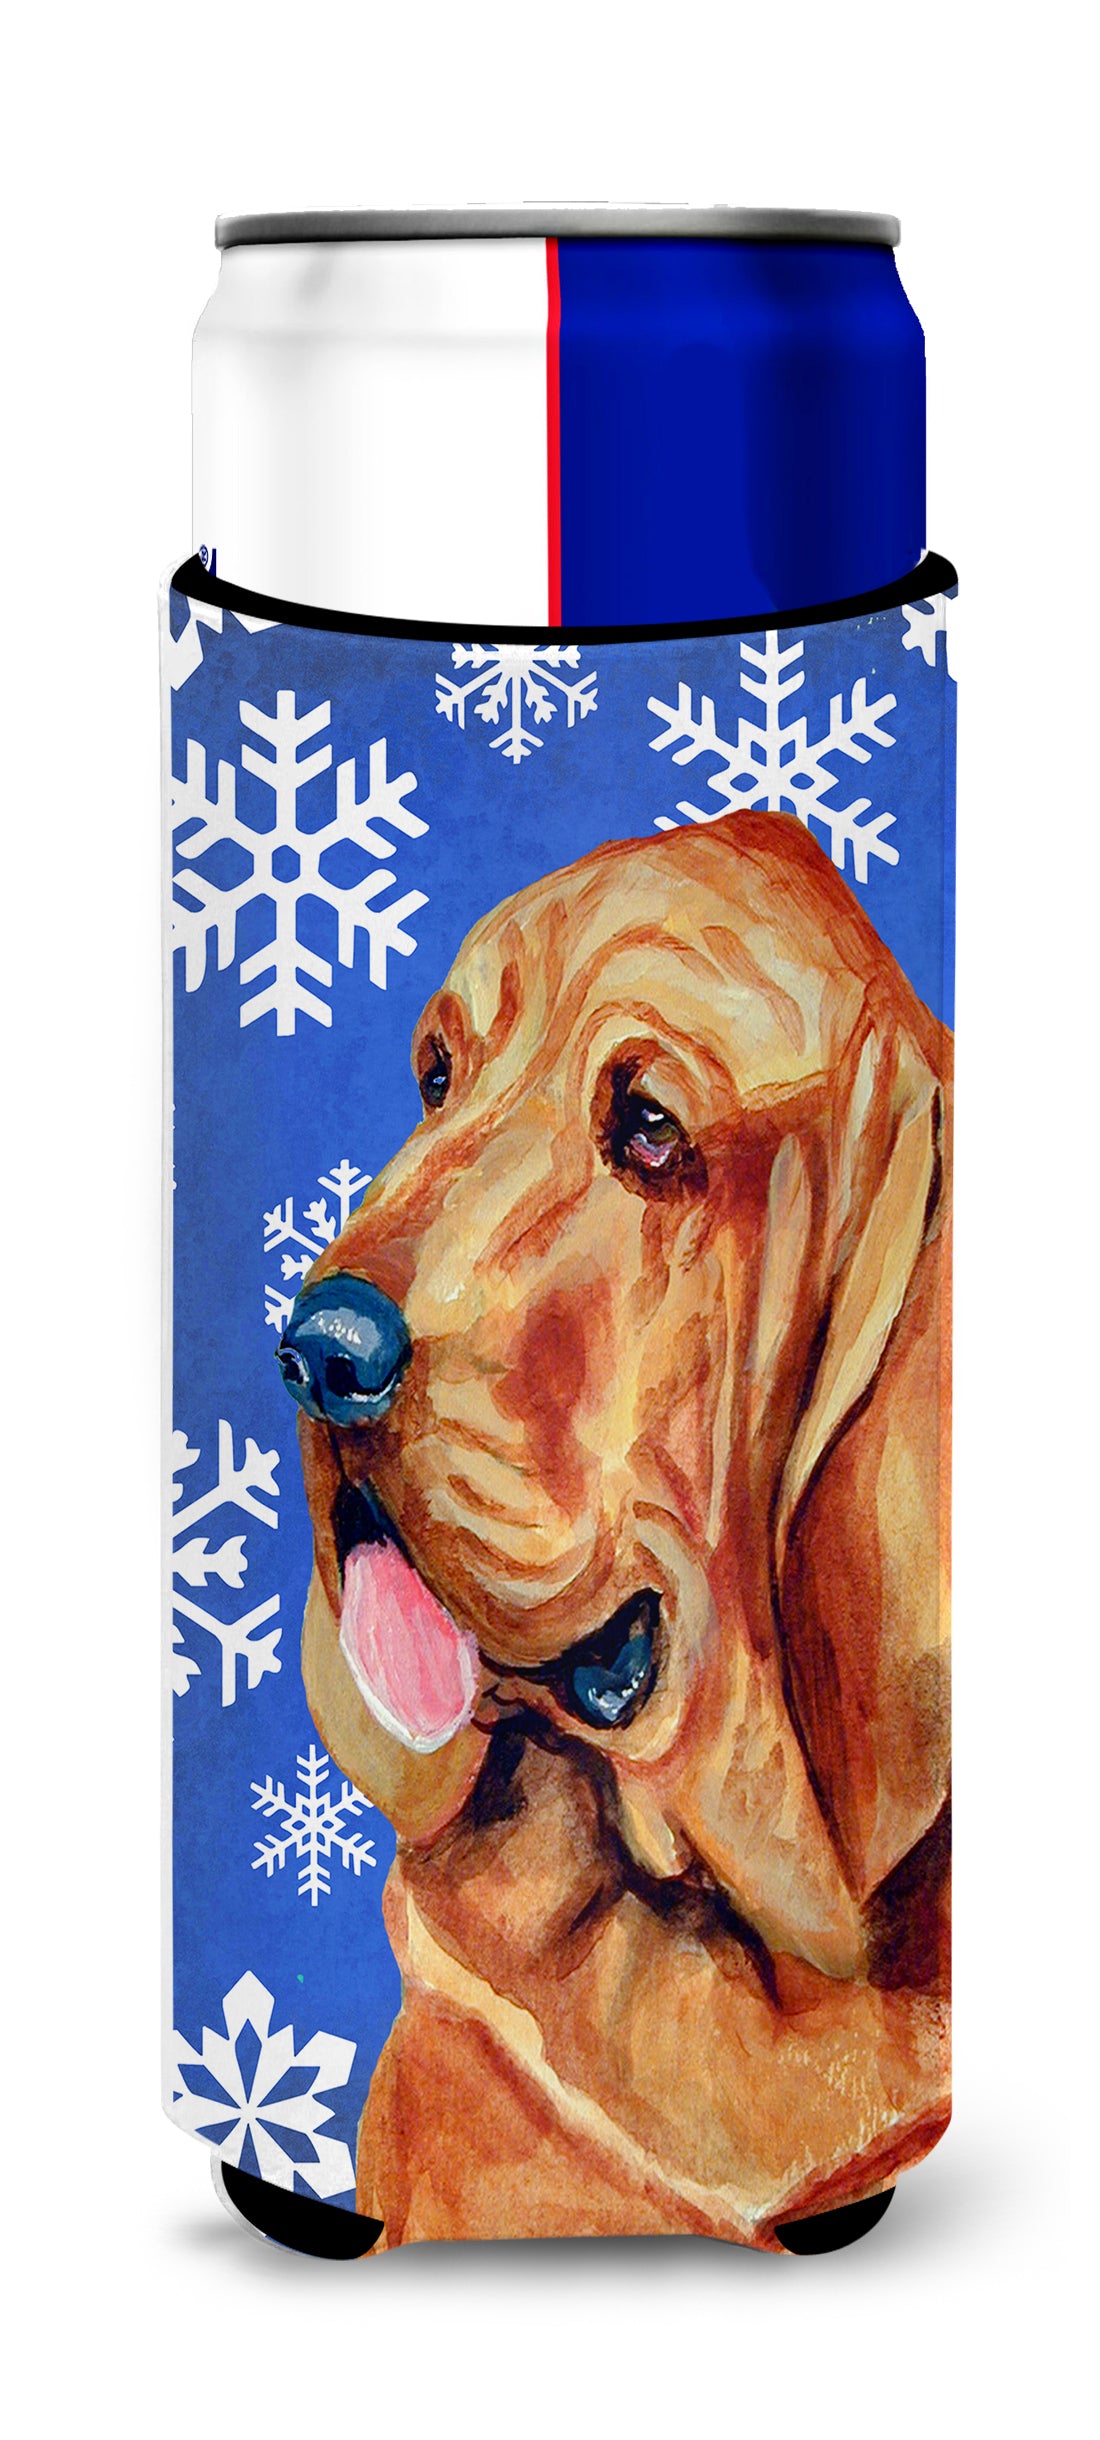 Bloodhound Winter Snowflakes Holiday Ultra Beverage Insulators for slim cans LH9286MUK.